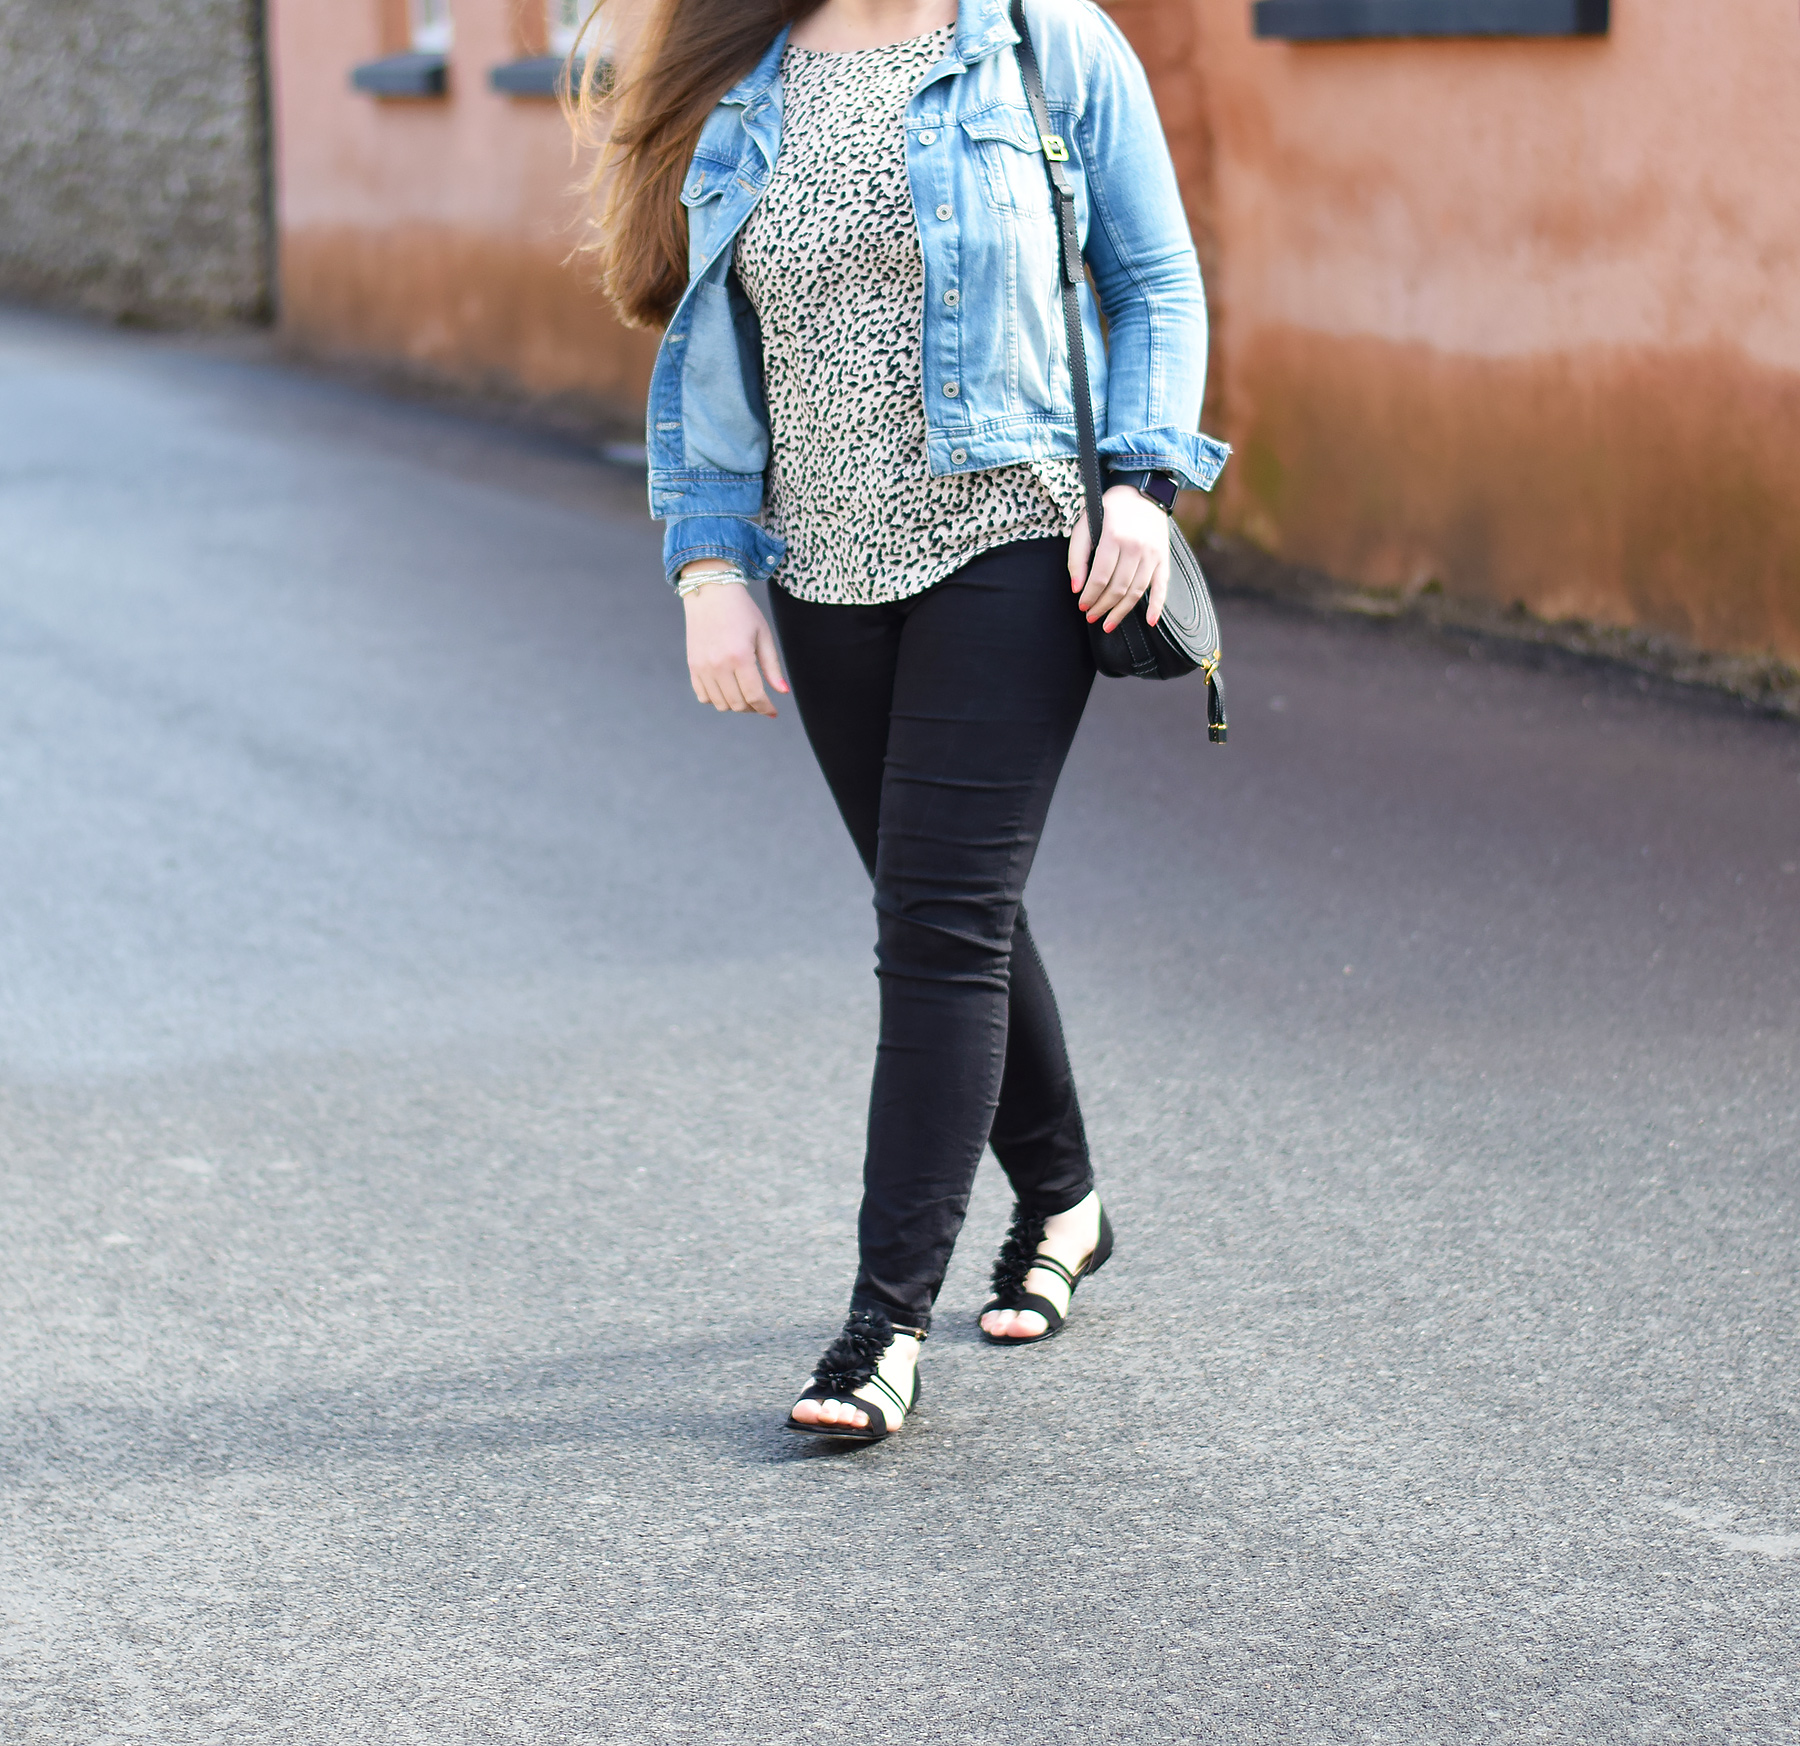 Styling denim and leopard print together outfit